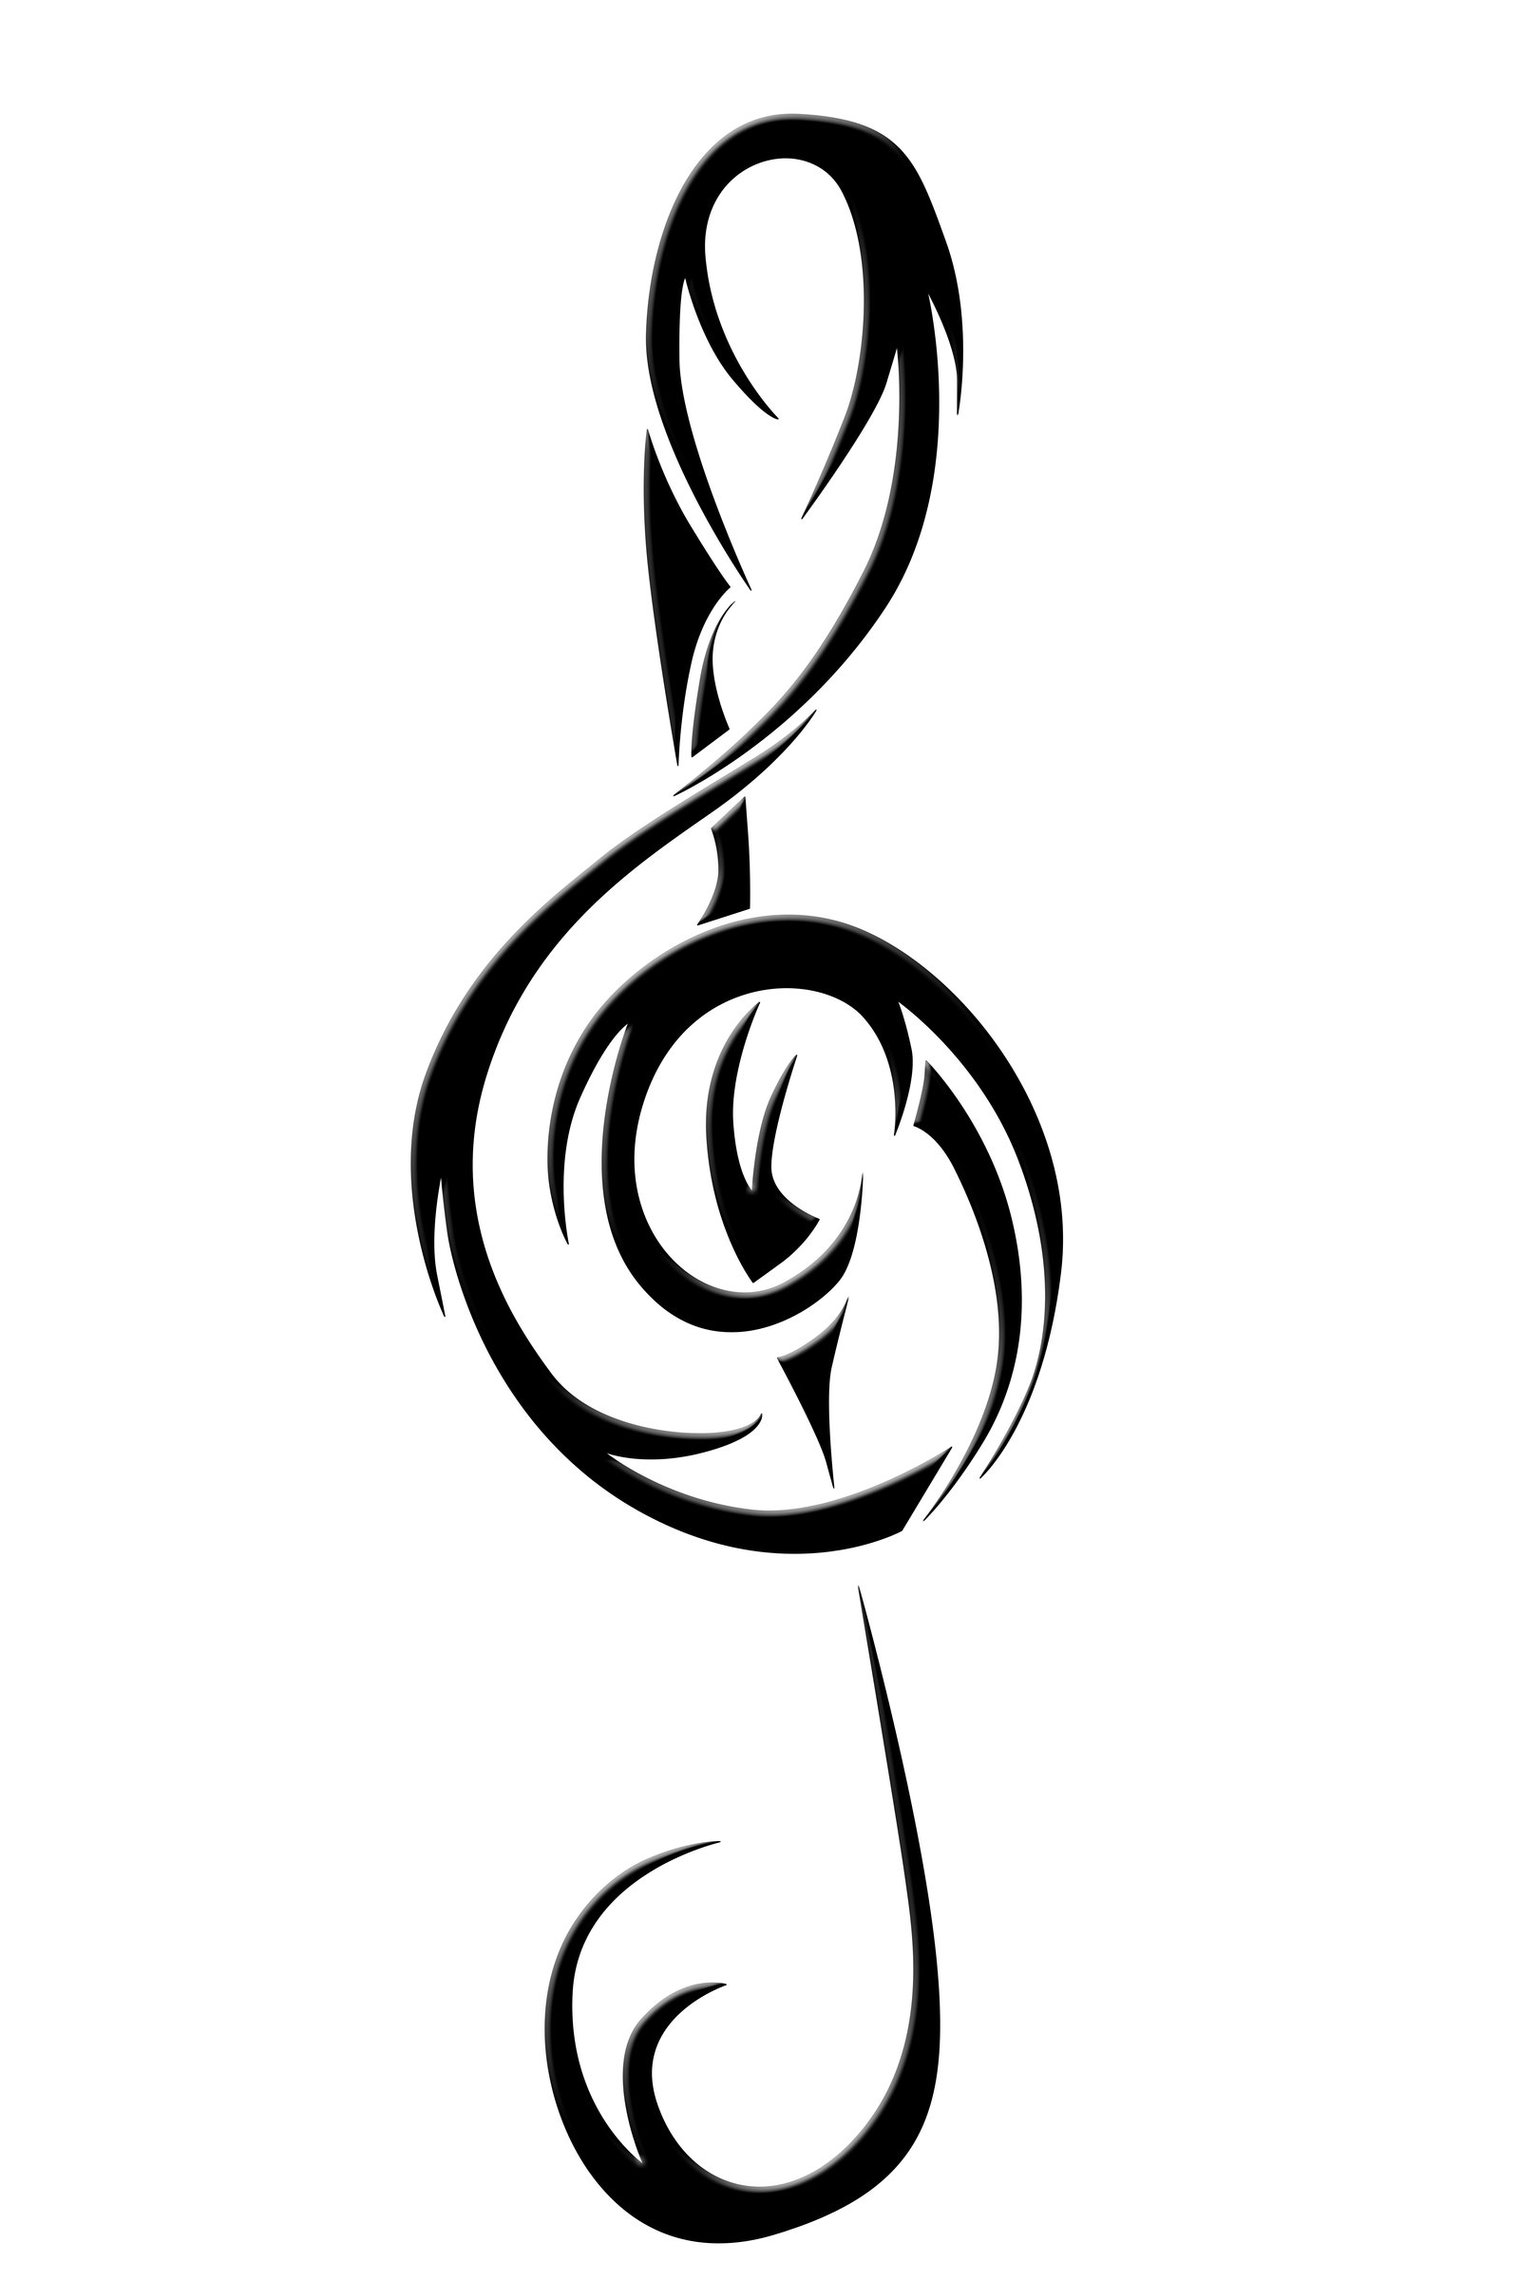 Bass Clef Designs Clipart - Free to use Clip Art Resource